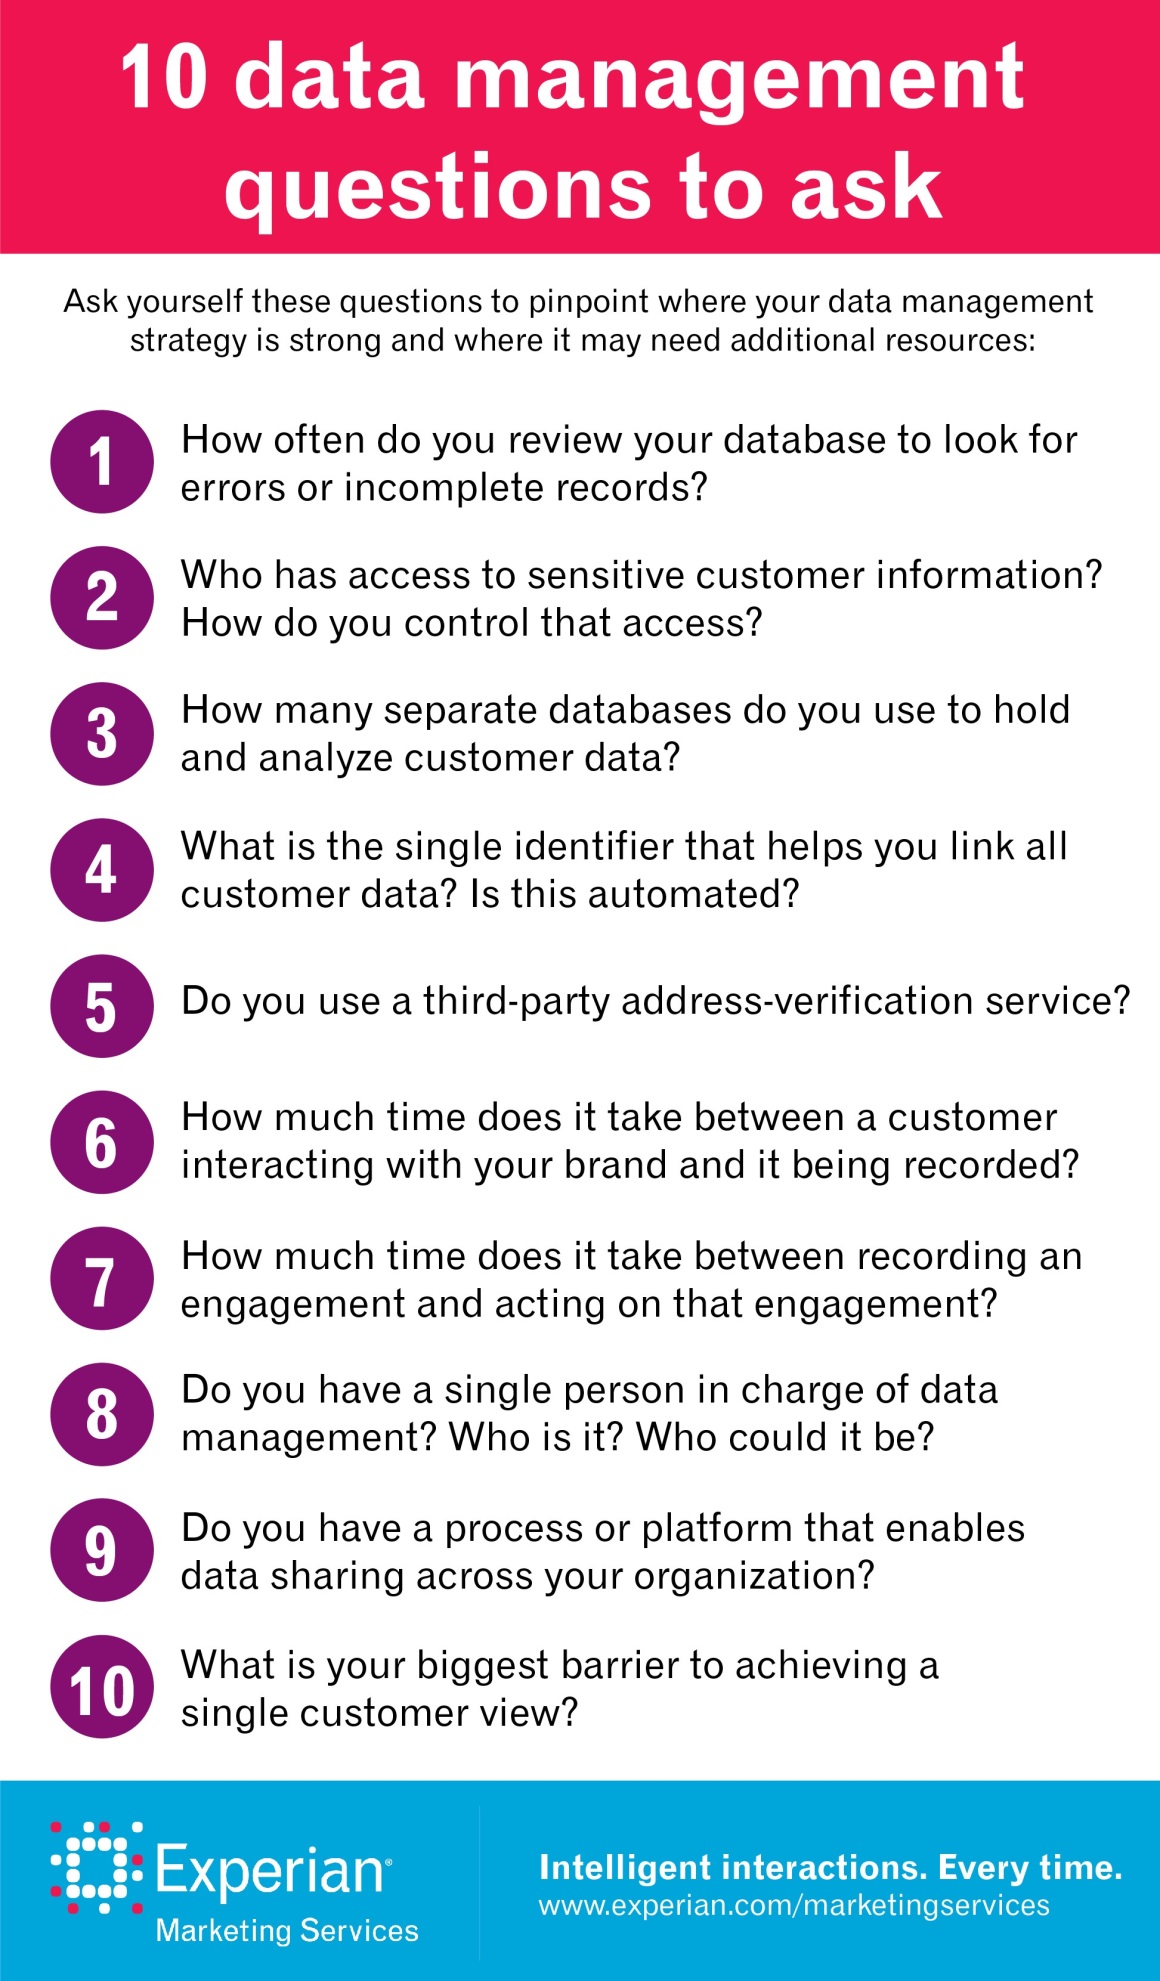 Ten data management questions to ask